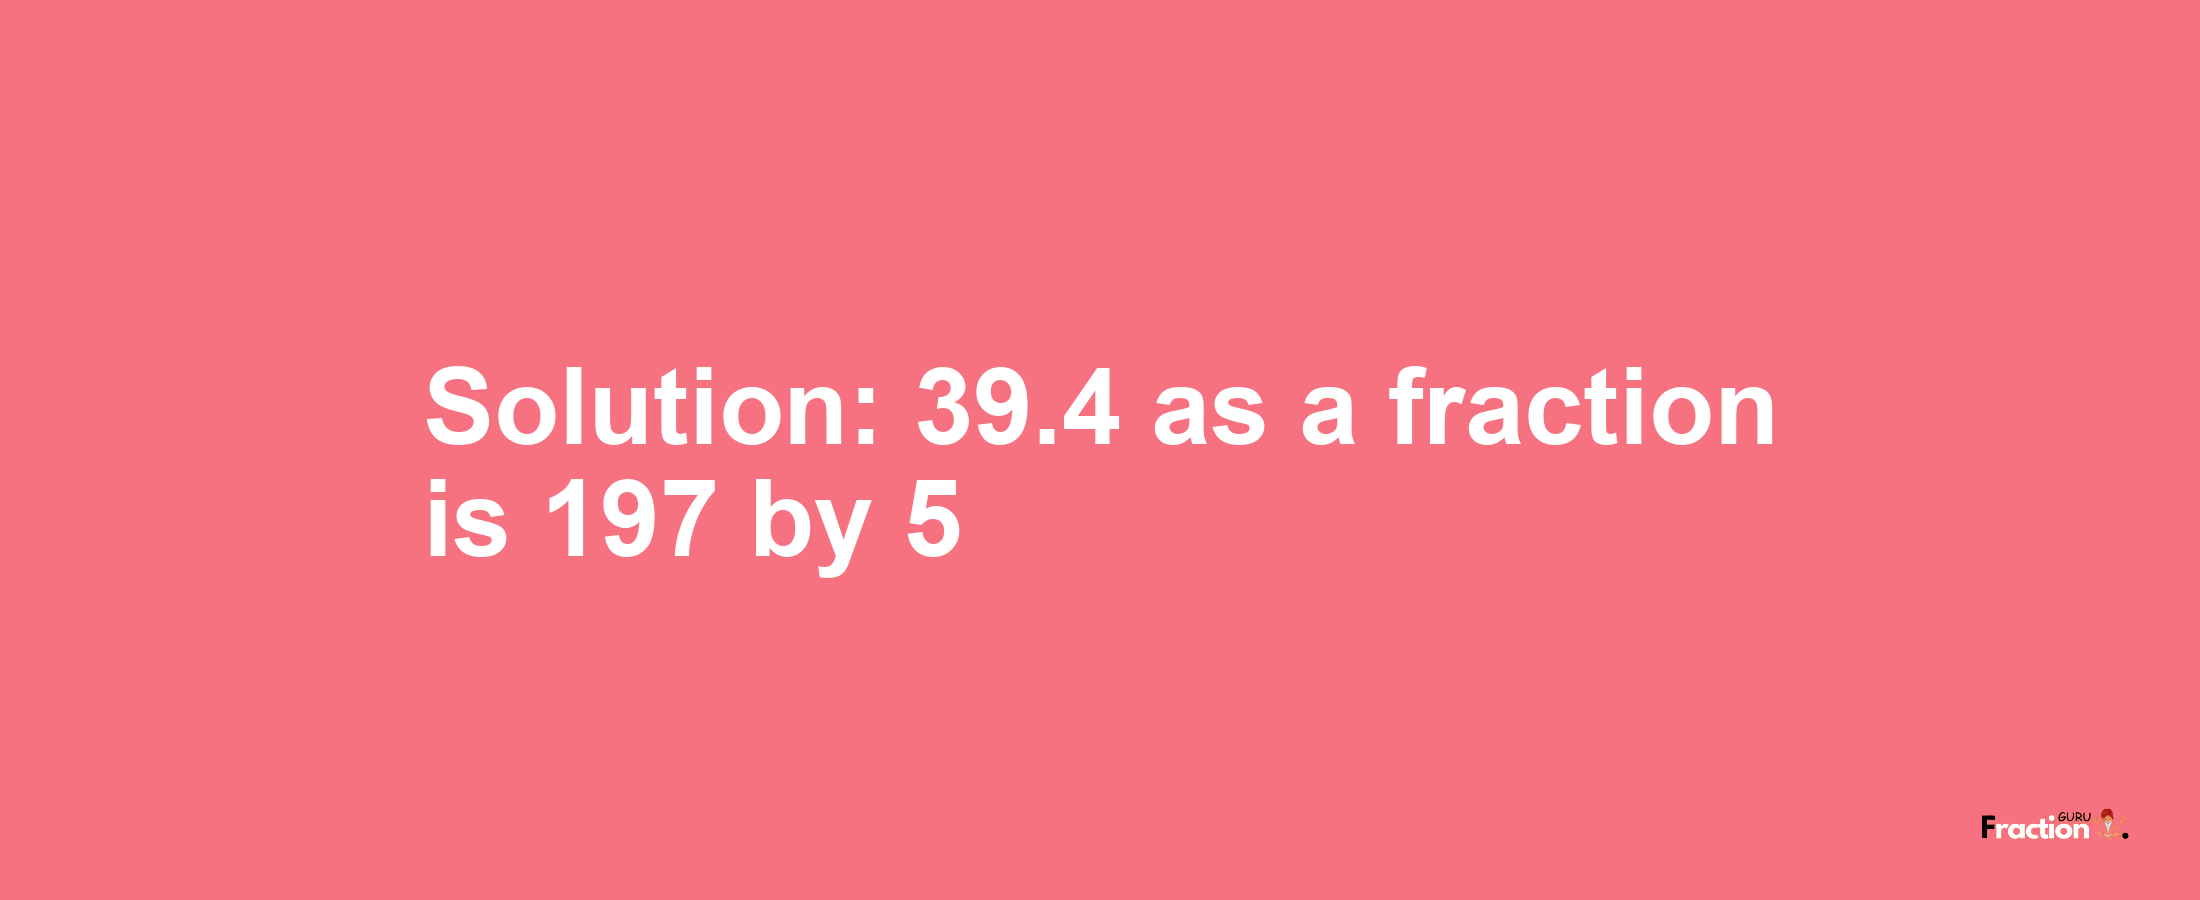 Solution:39.4 as a fraction is 197/5